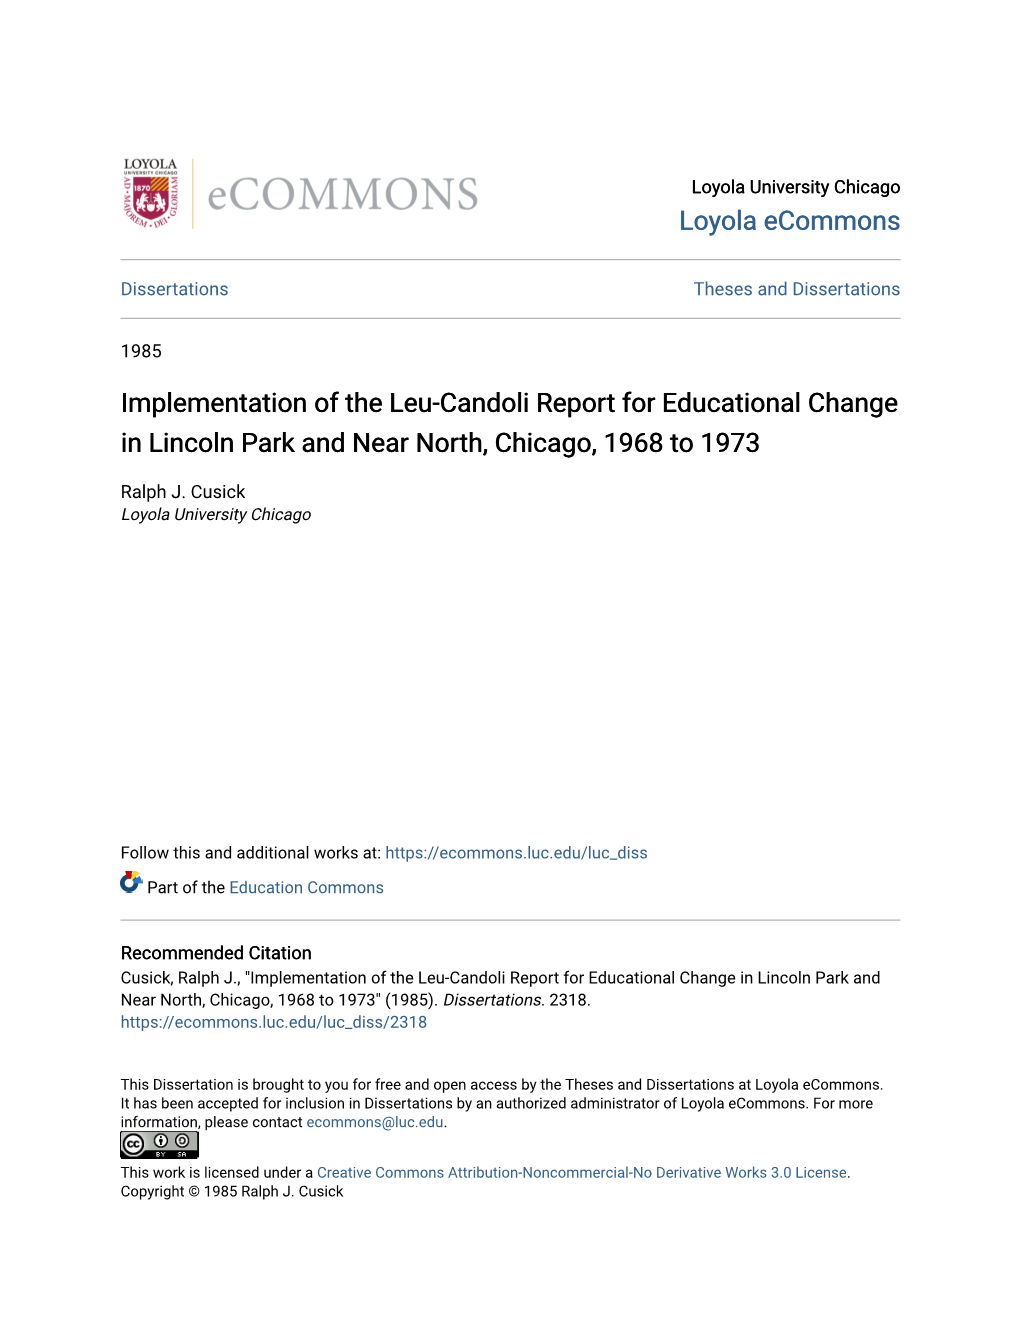 Implementation of the Leu-Candoli Report for Educational Change in Lincoln Park and Near North, Chicago, 1968 to 1973